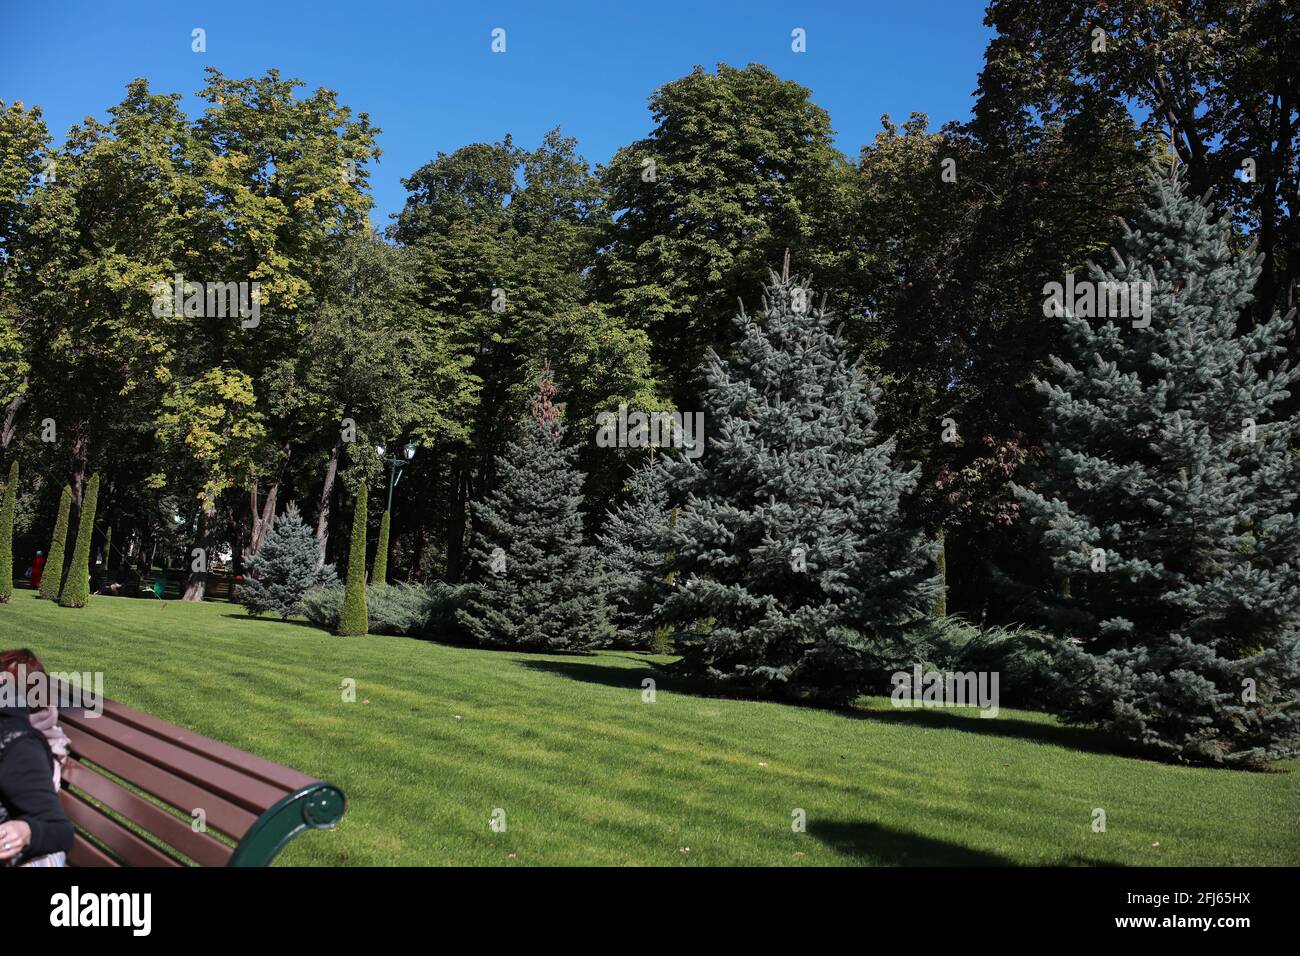 A person sitting on a bench in a park Stock Photo